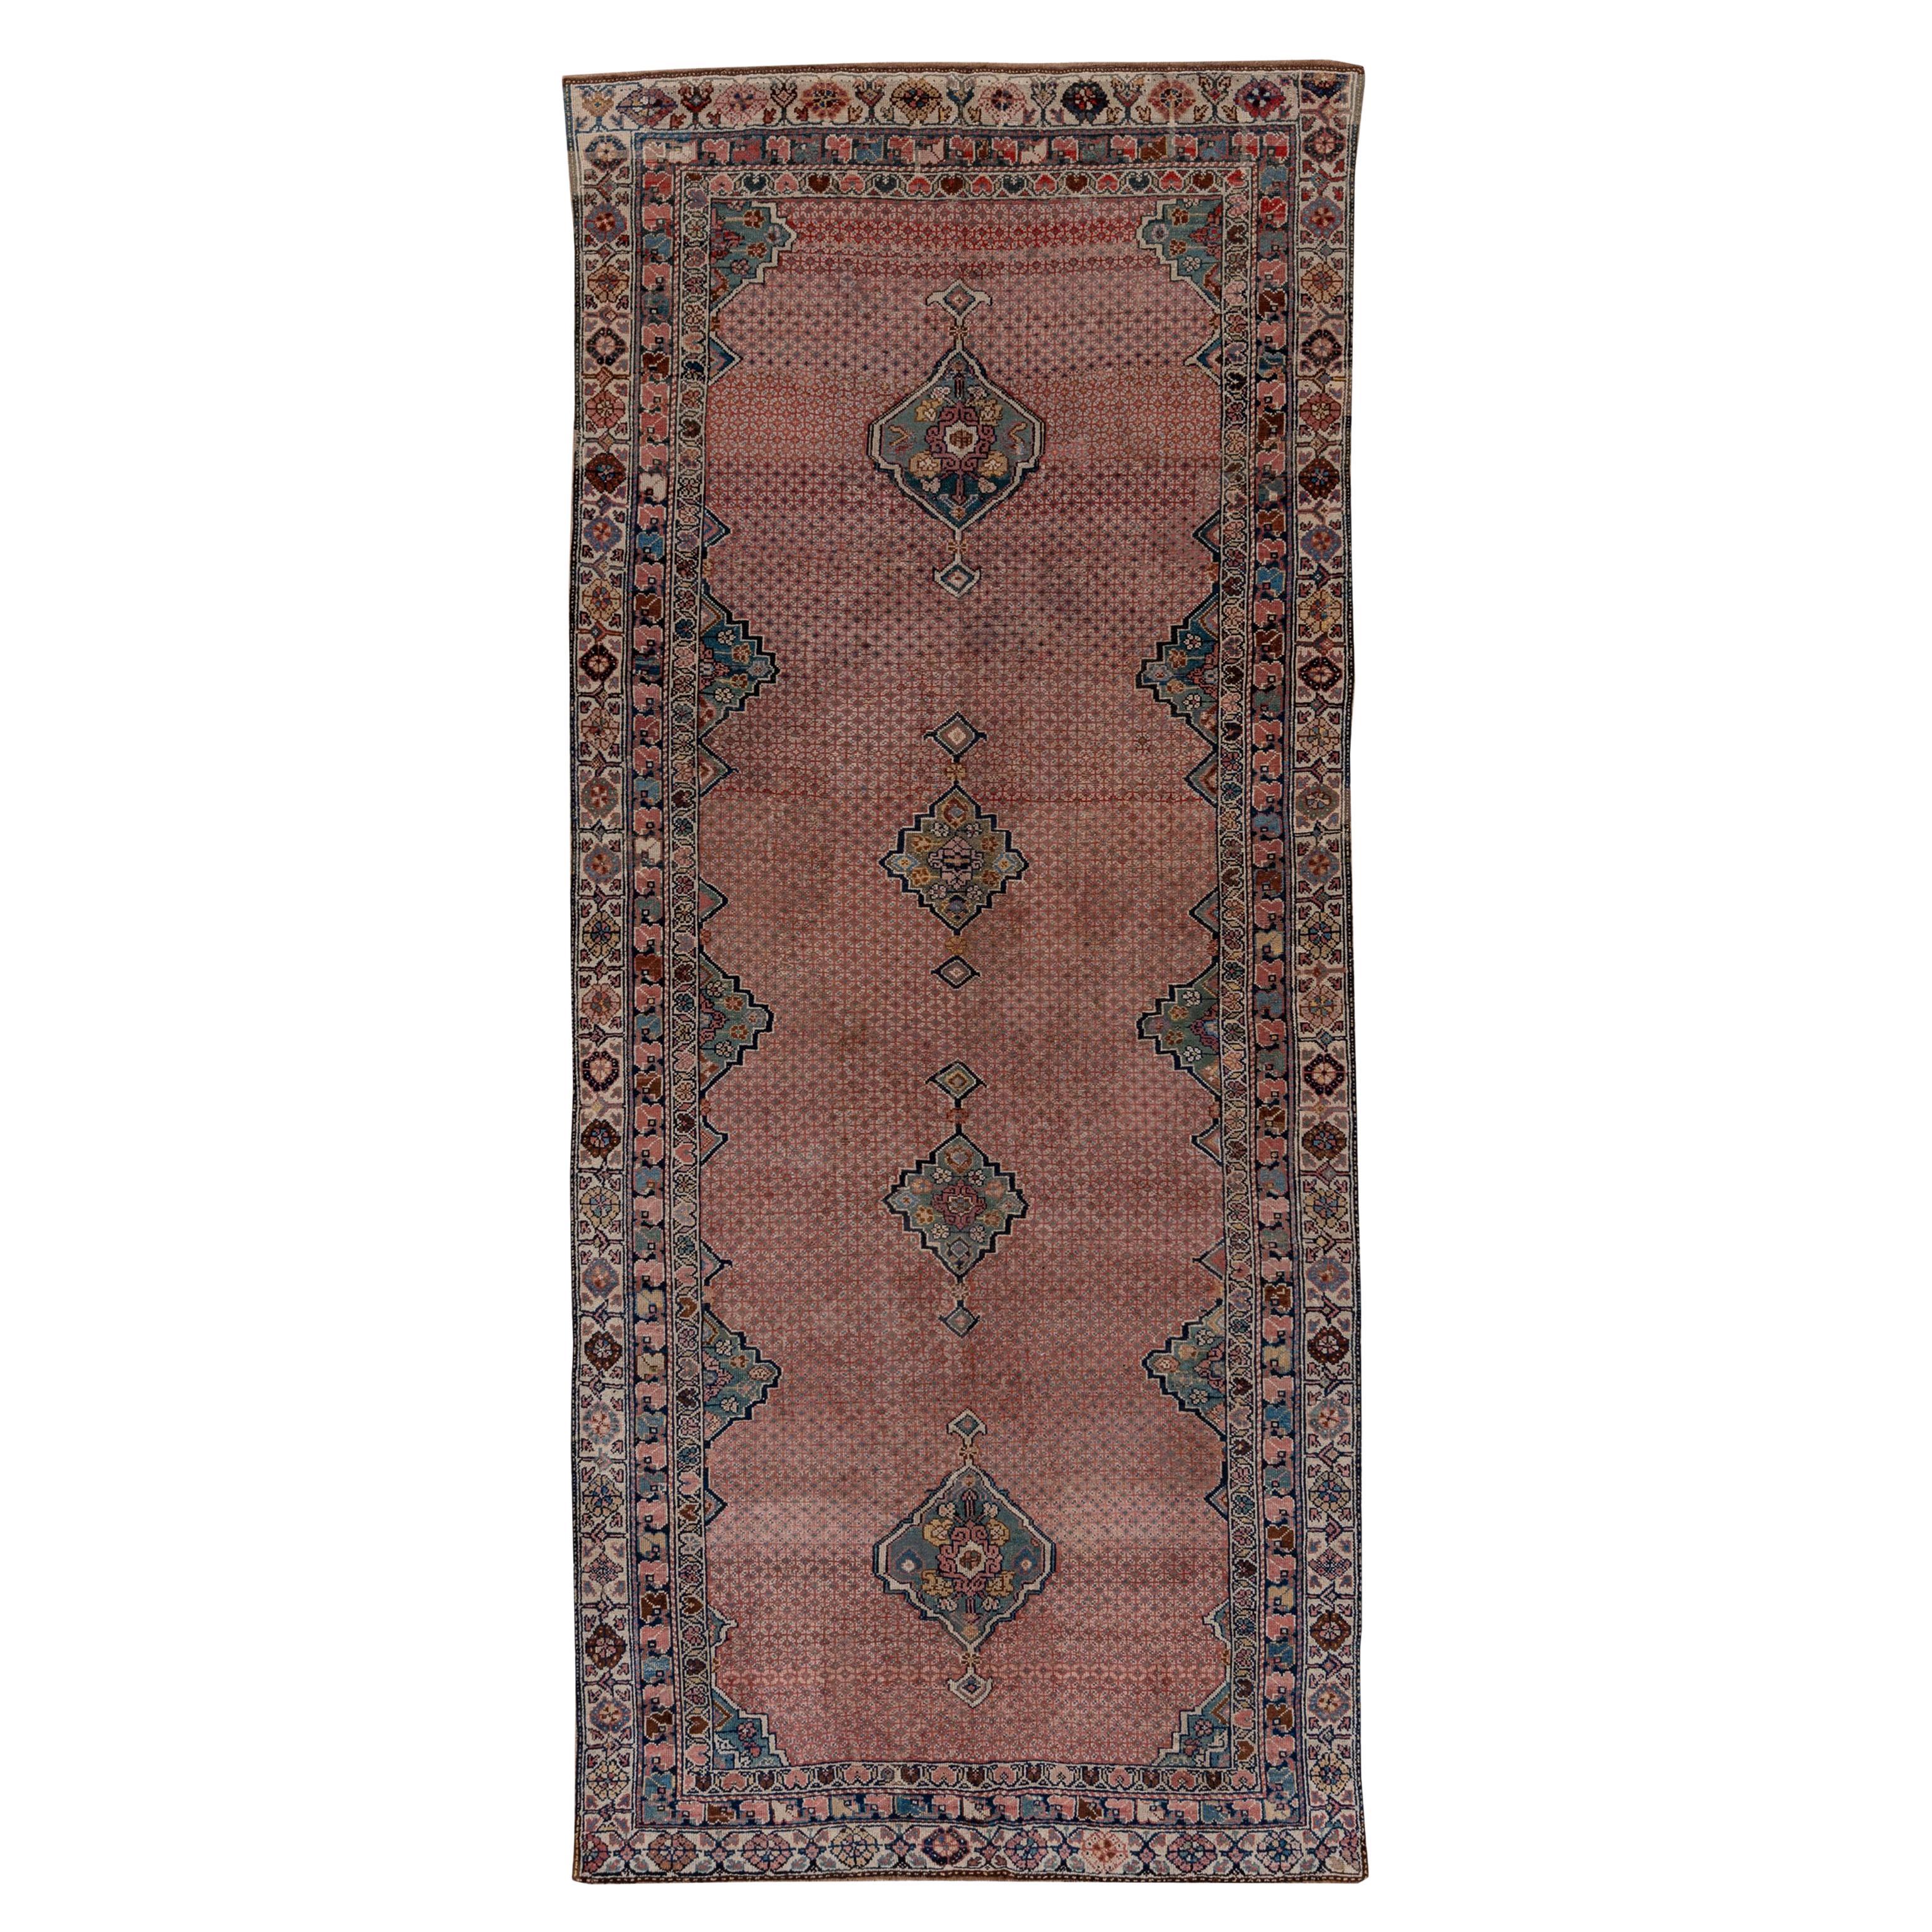 Antique Persian Malayer Gallery Rug, Blush Pink Field, circa 1910s For Sale